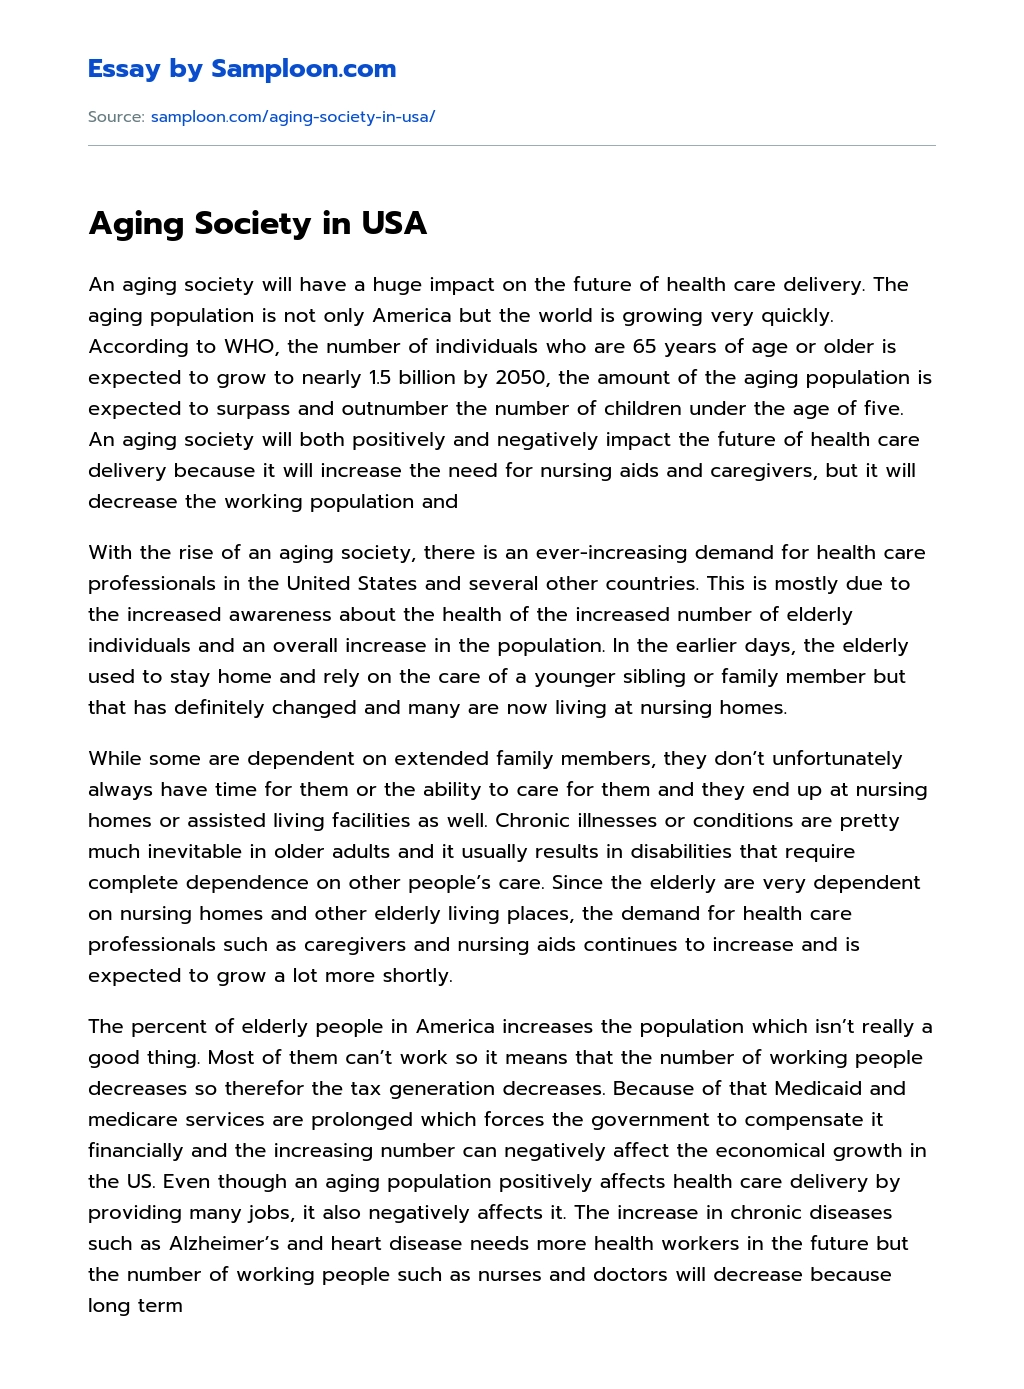 Aging Society in USA essay